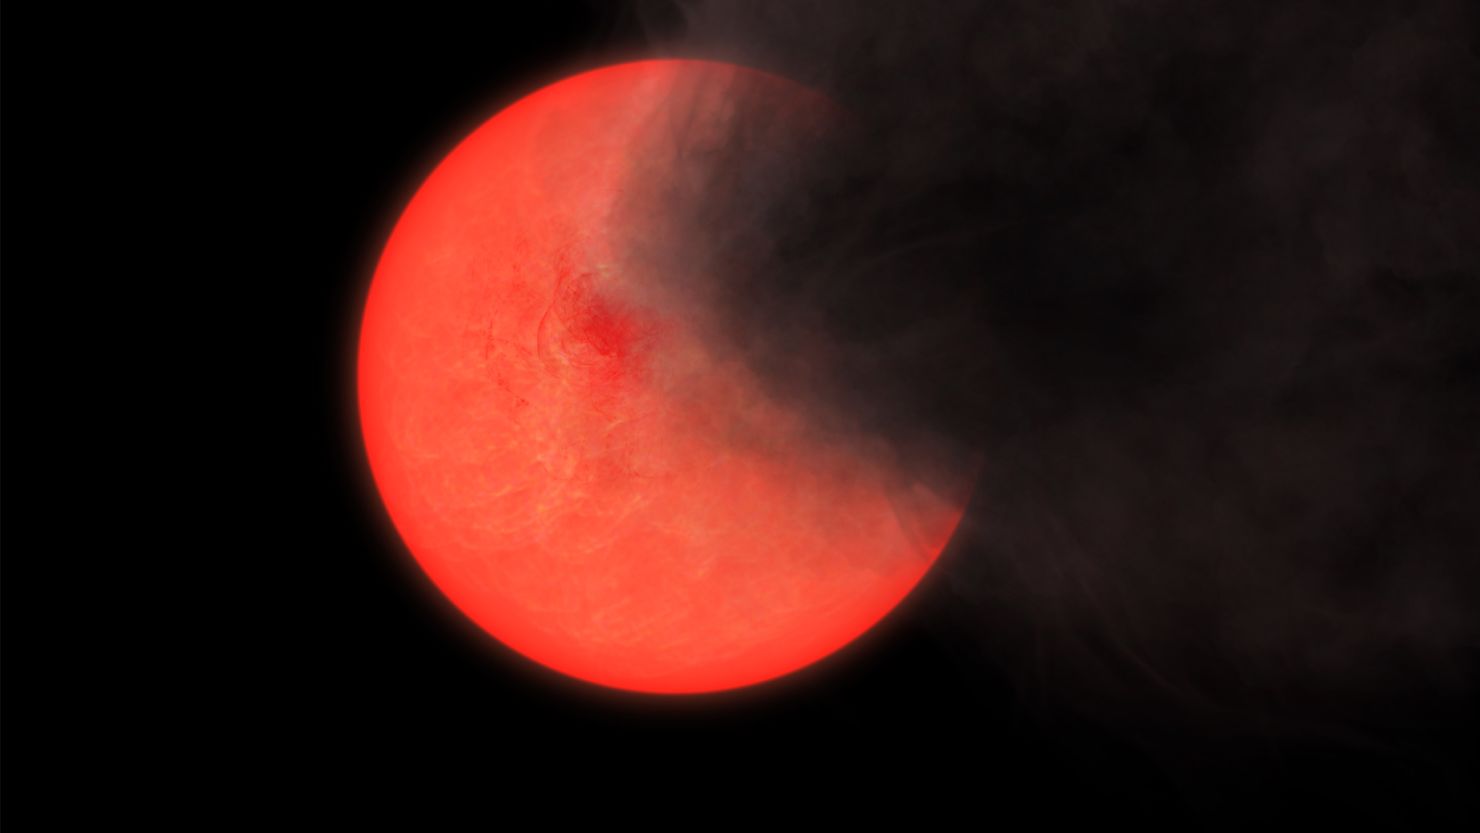 An artist's illustration depicts an an old smoker star, or an aging red giant star releasing a thick cloud of smoke and dust.